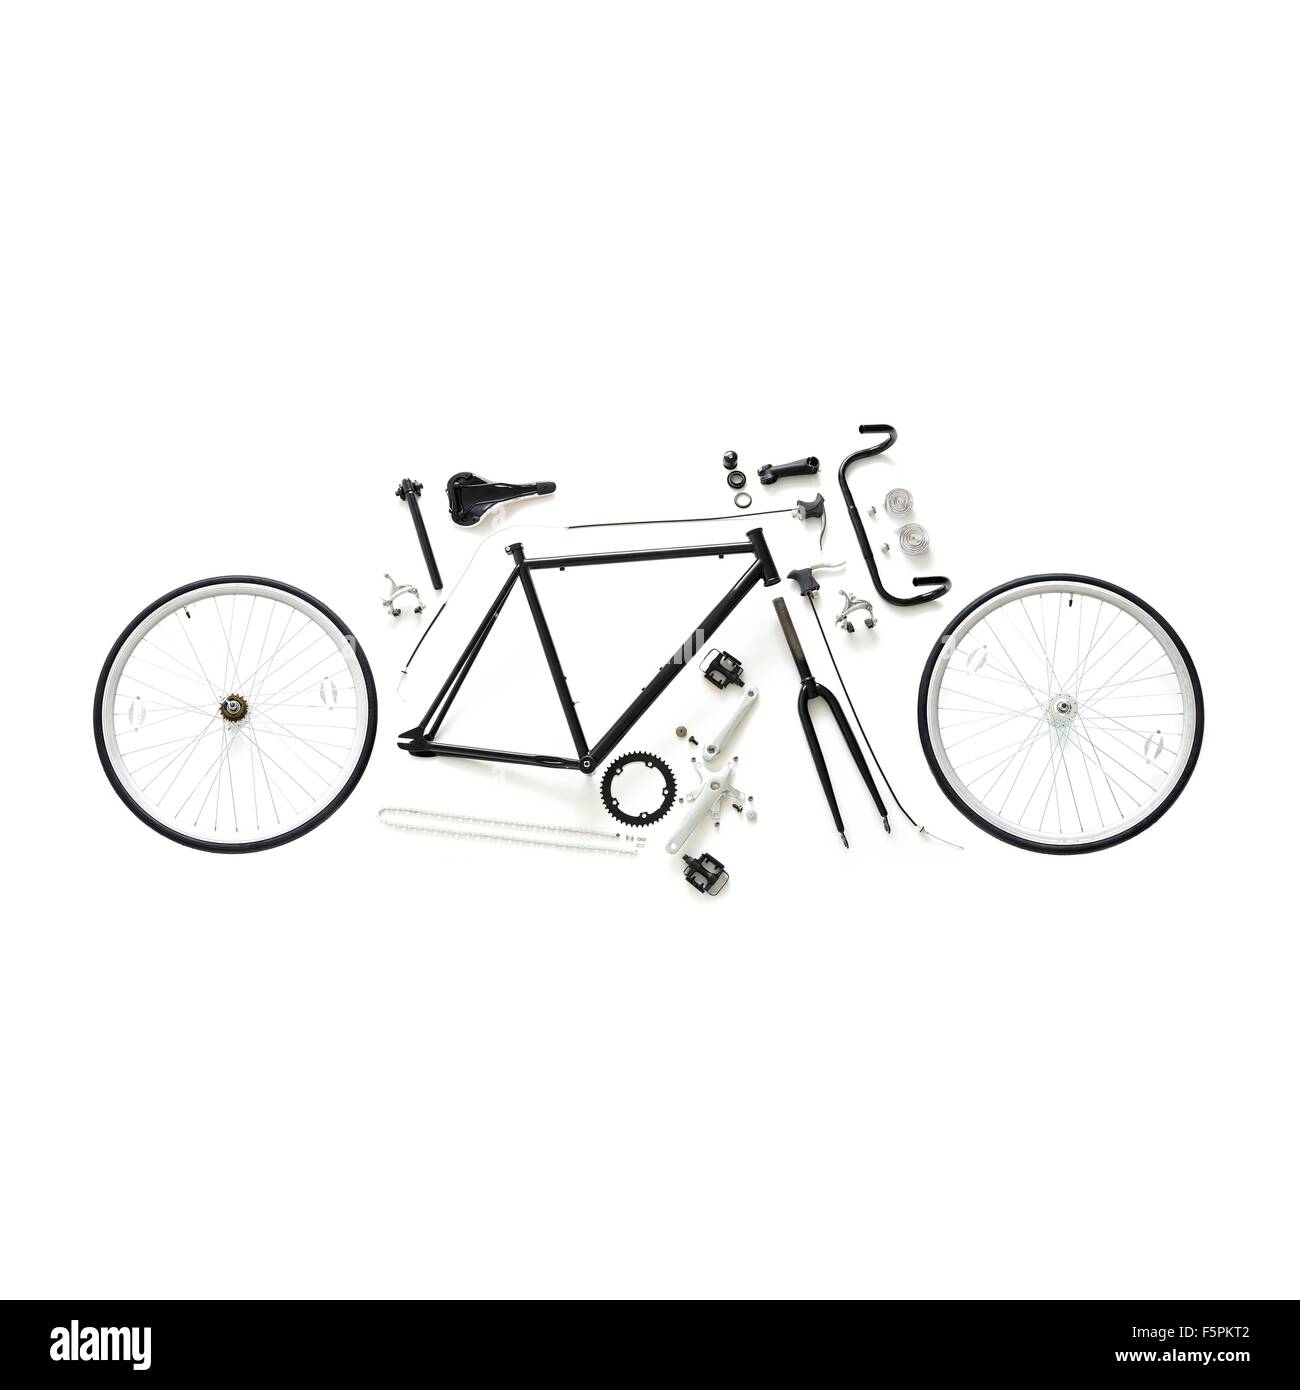 Components of a fixed-gear road bike against a white background. Stock Photo